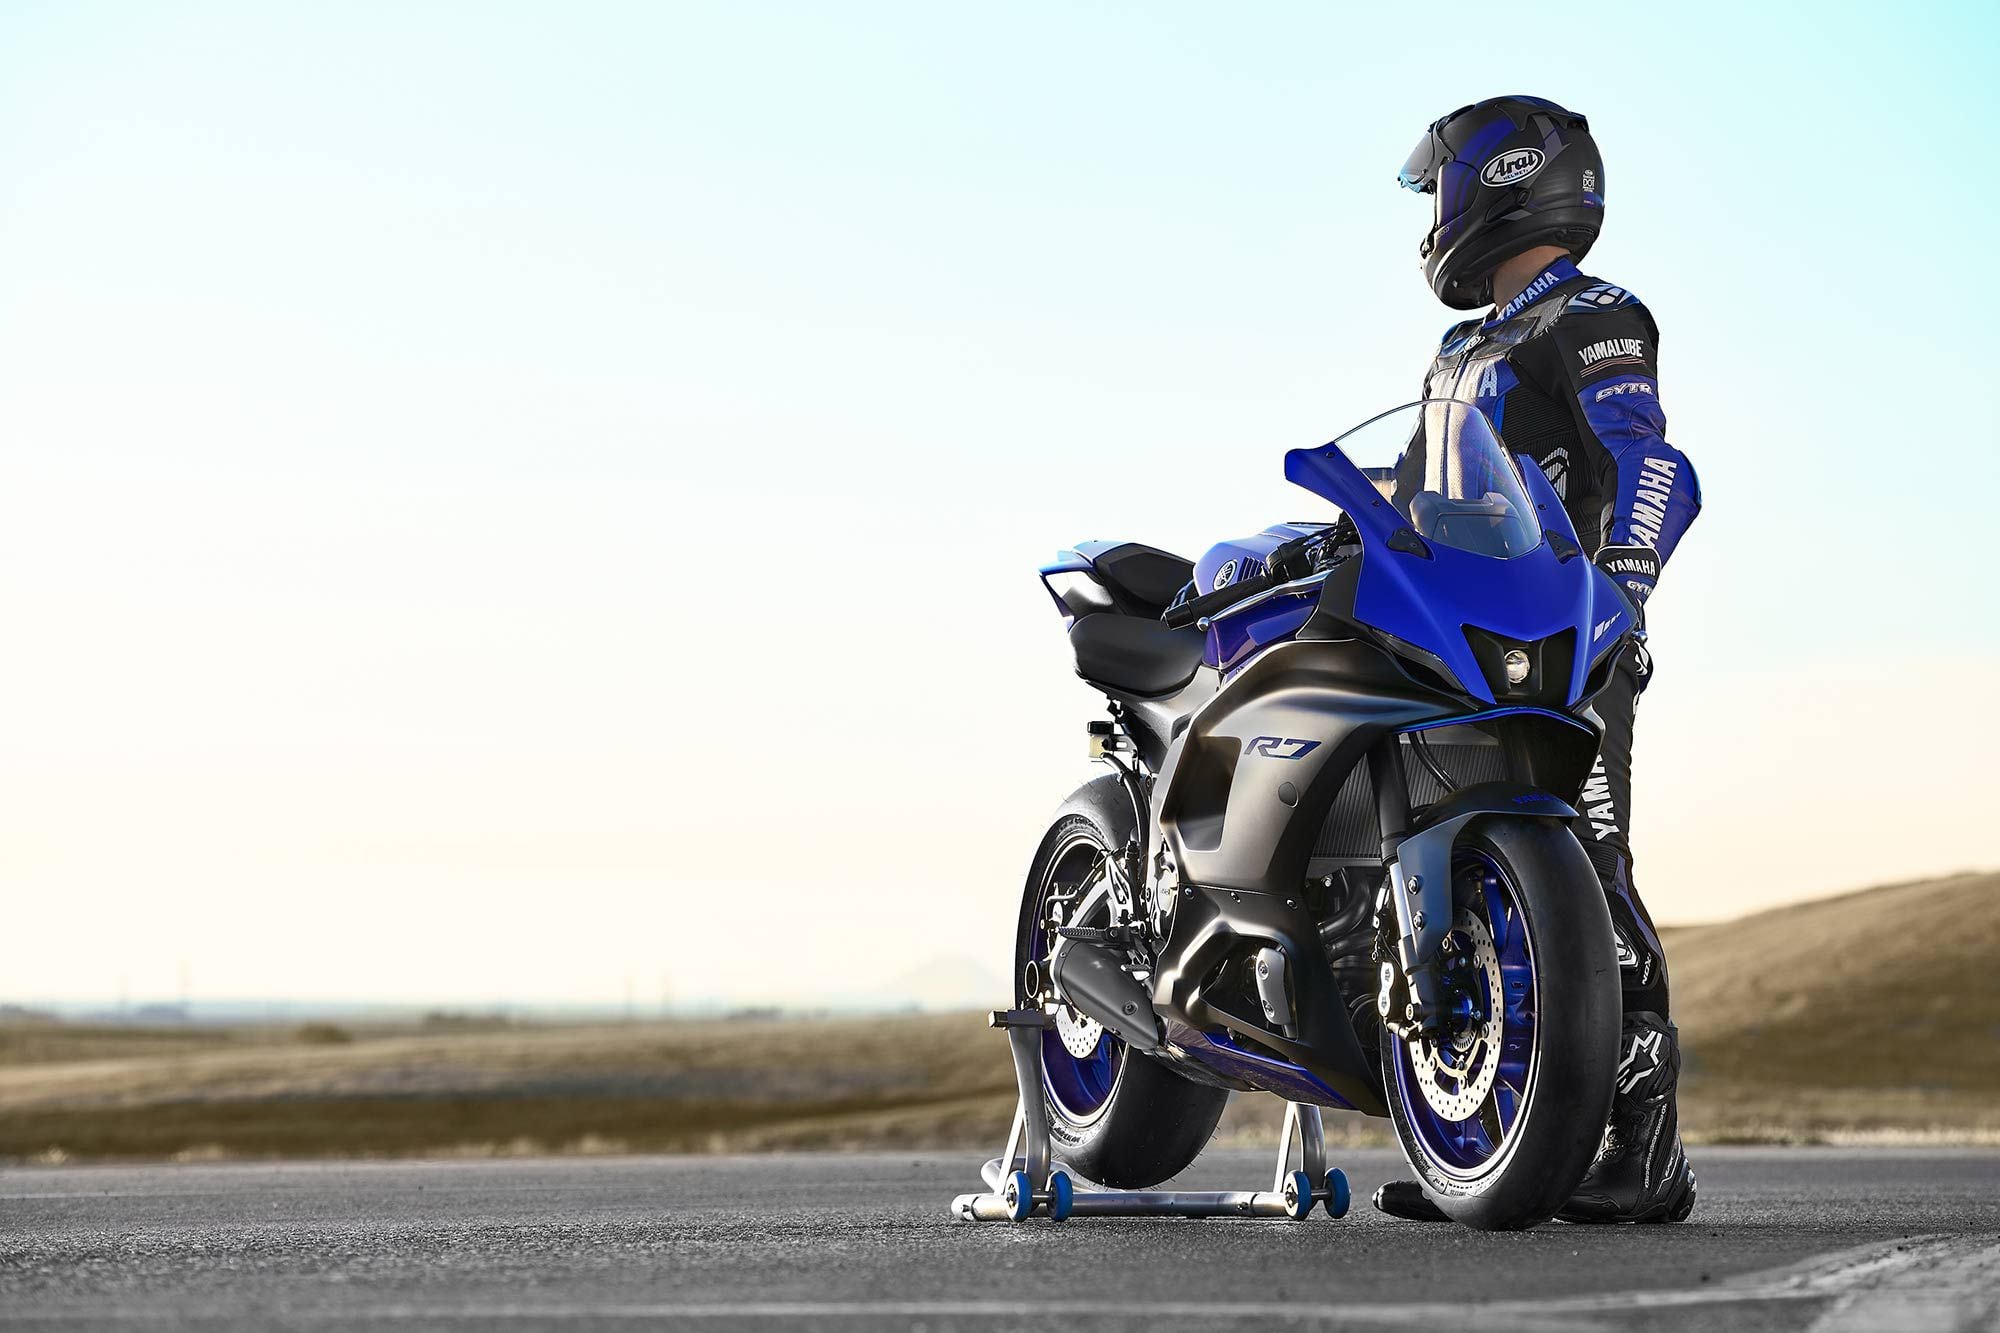 Yamaha is looking to the future and charting a course toward carbon neutrality by 2050.